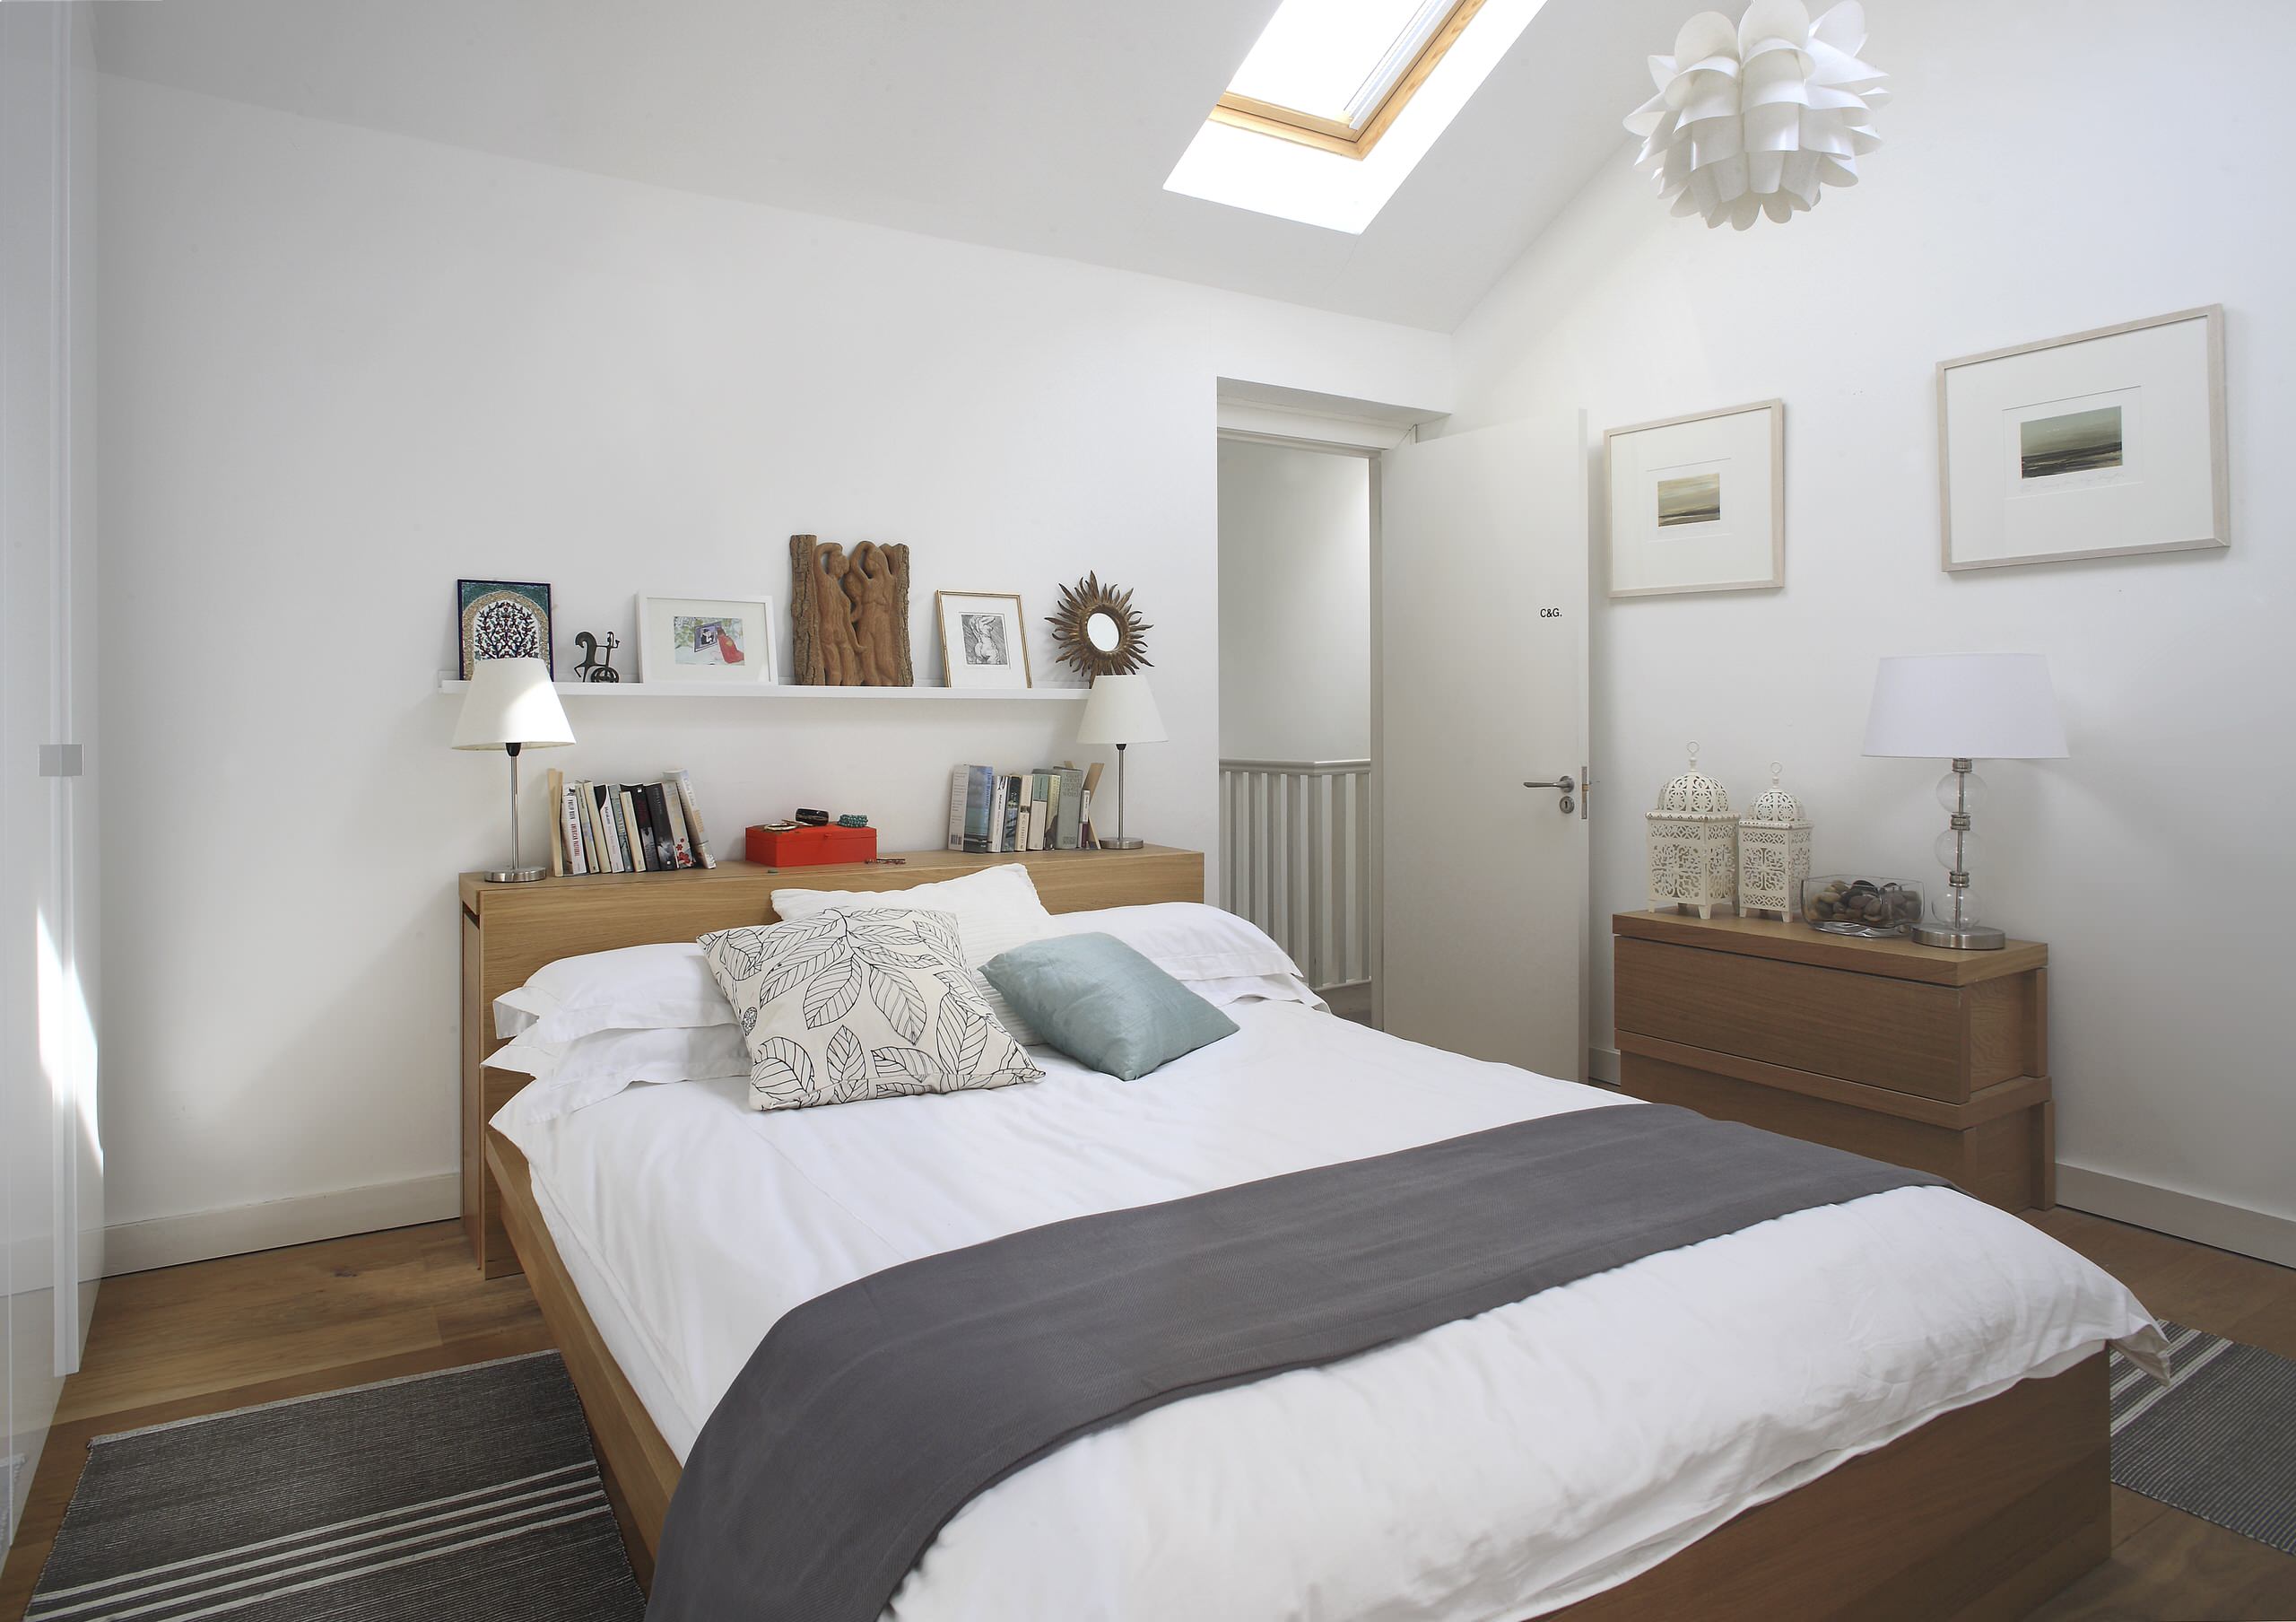 Malm Bed Houzz